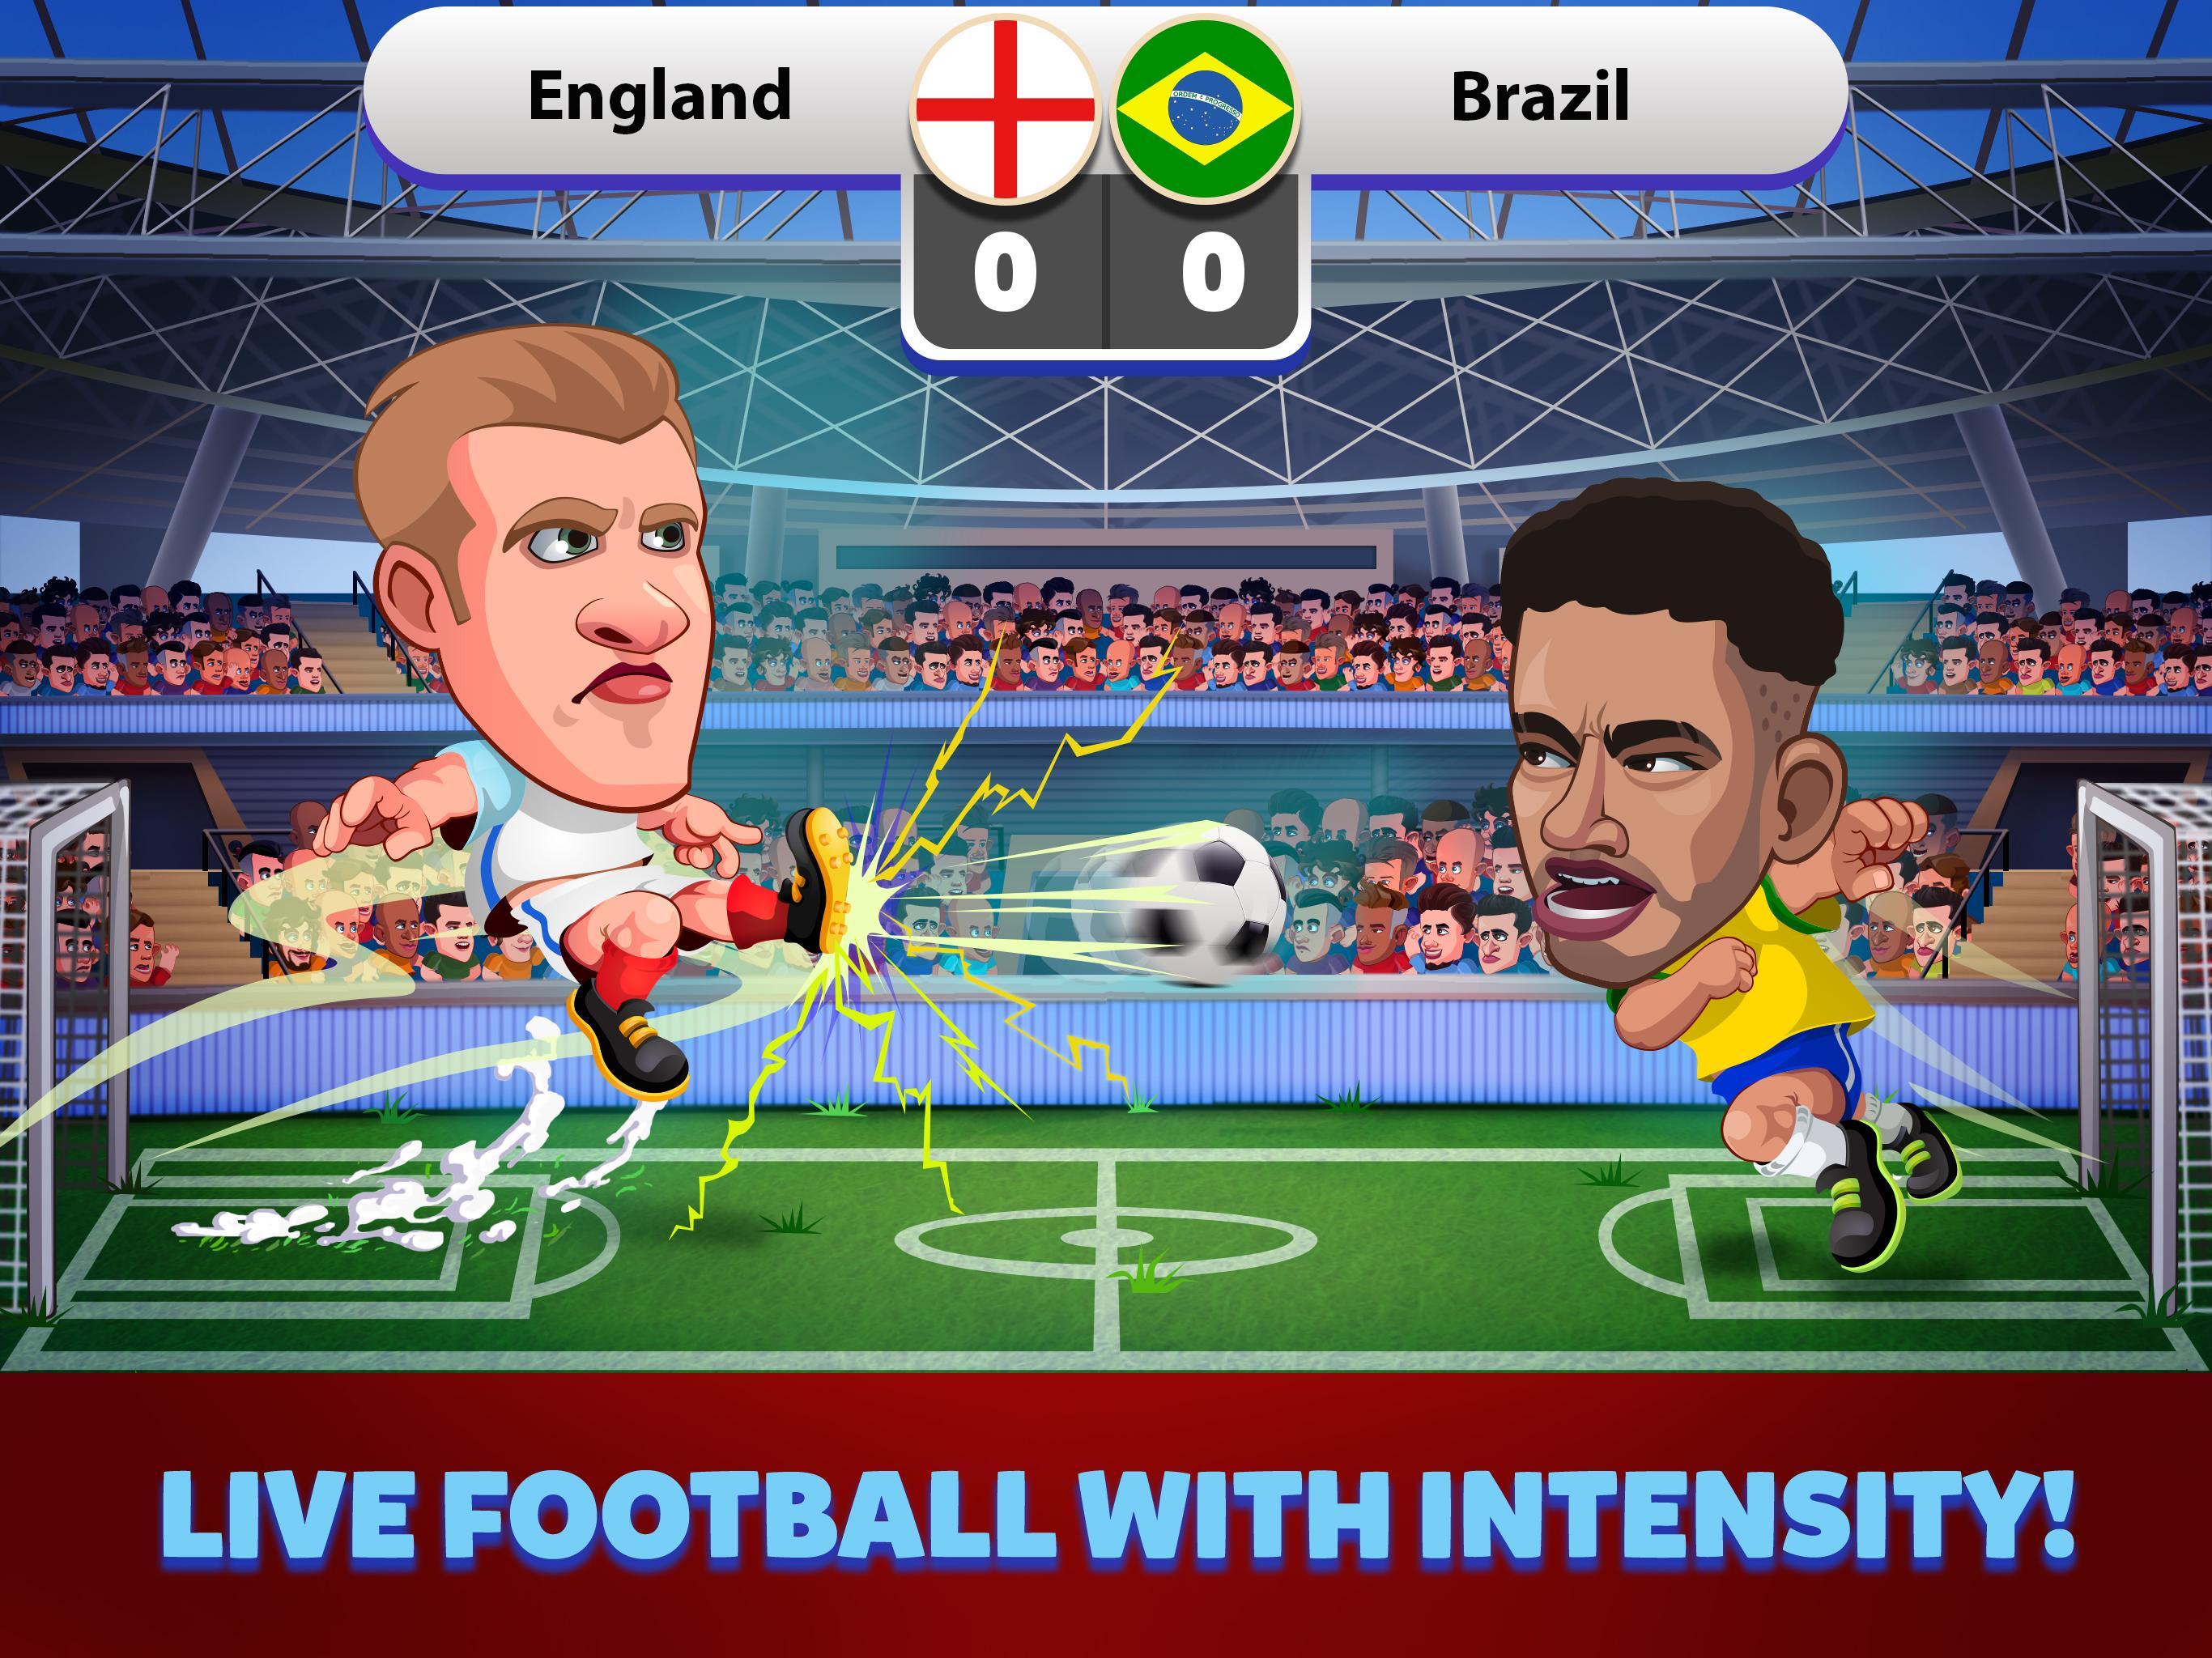 Head Soccer Russia Cup 2018: World Football League for Android